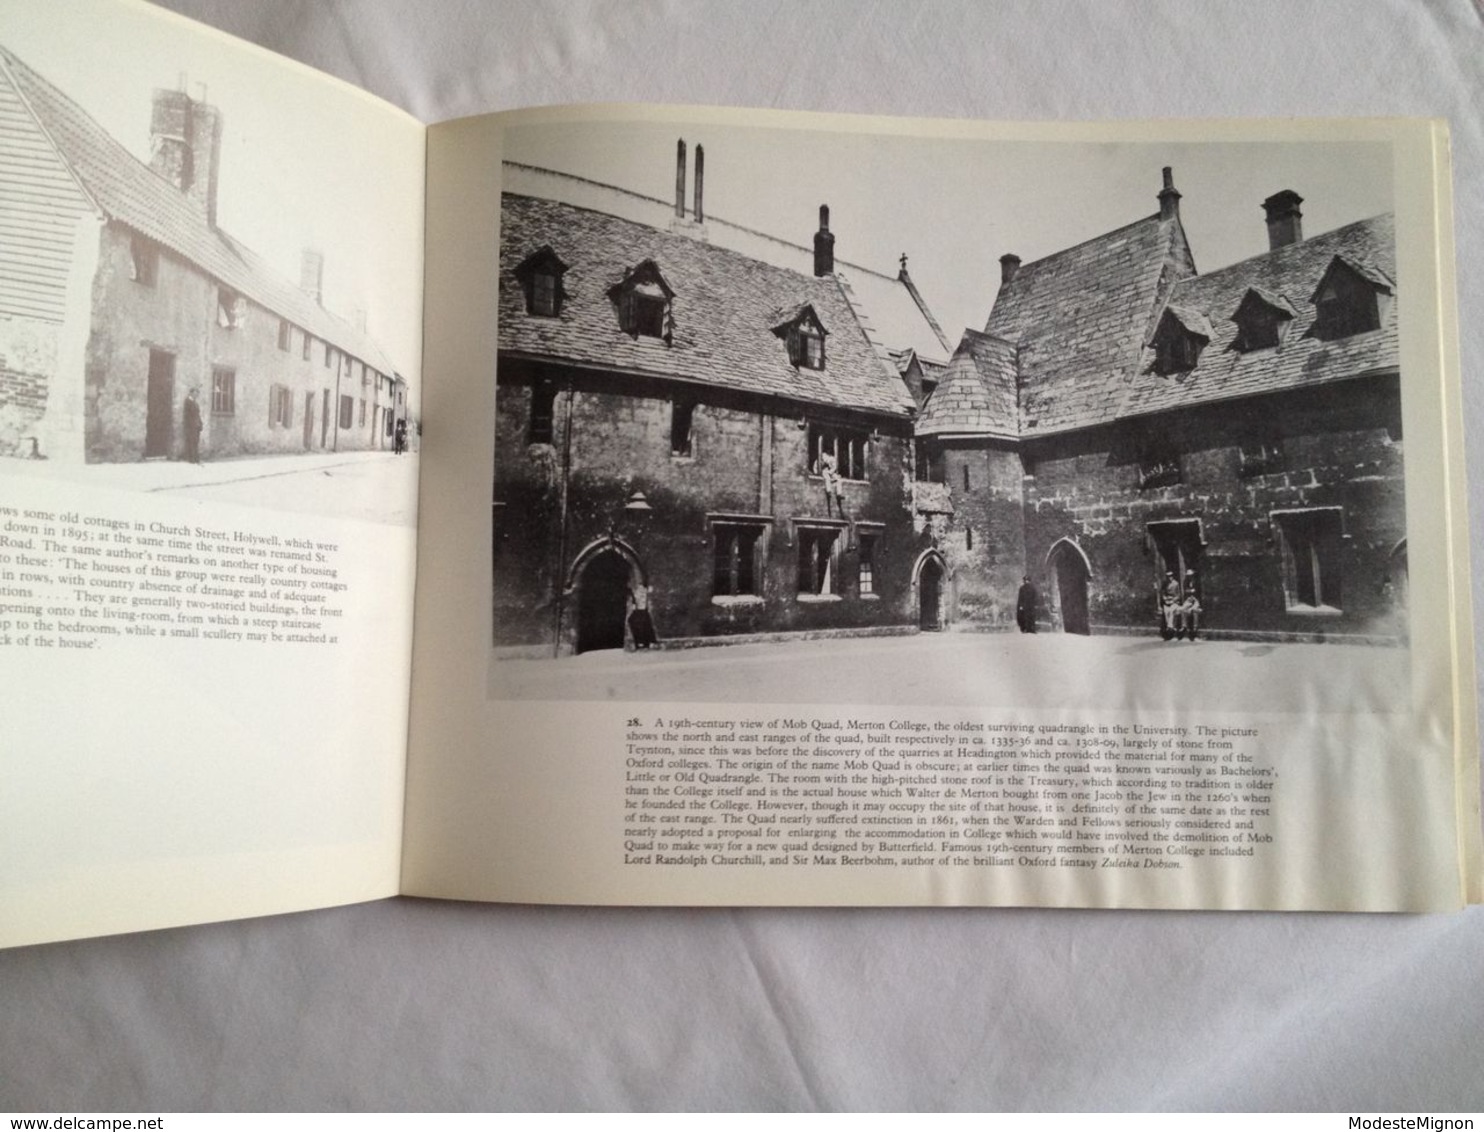 Oxford As It Was By Robert G. Neville And Tony Sloggett - Europe